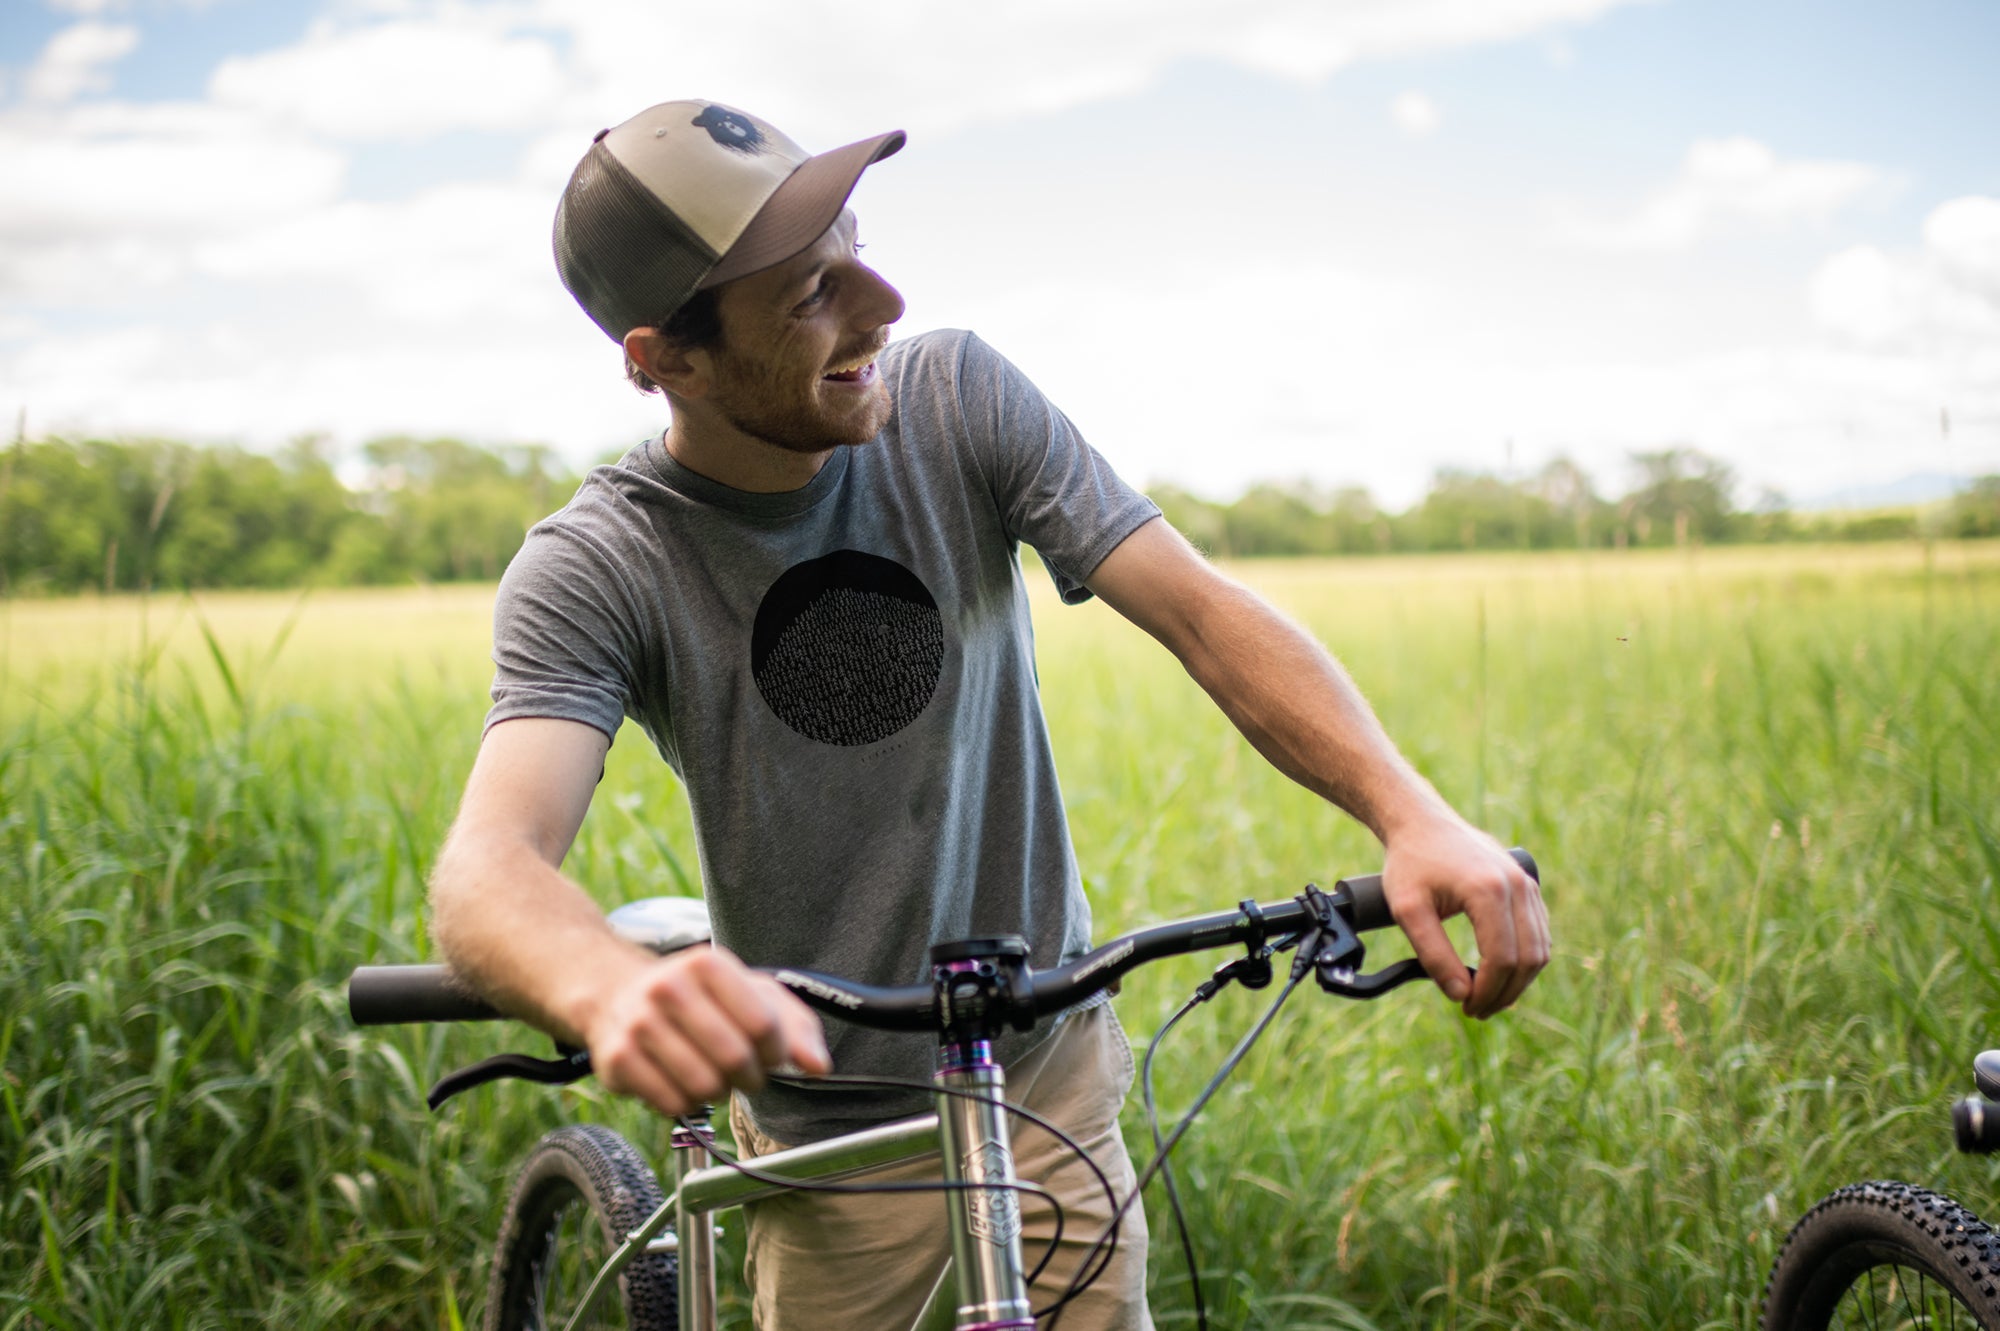 Man wearing Vermont Eclectic Company t-shirt and trucker hat leaning on his mountain bike in a green field